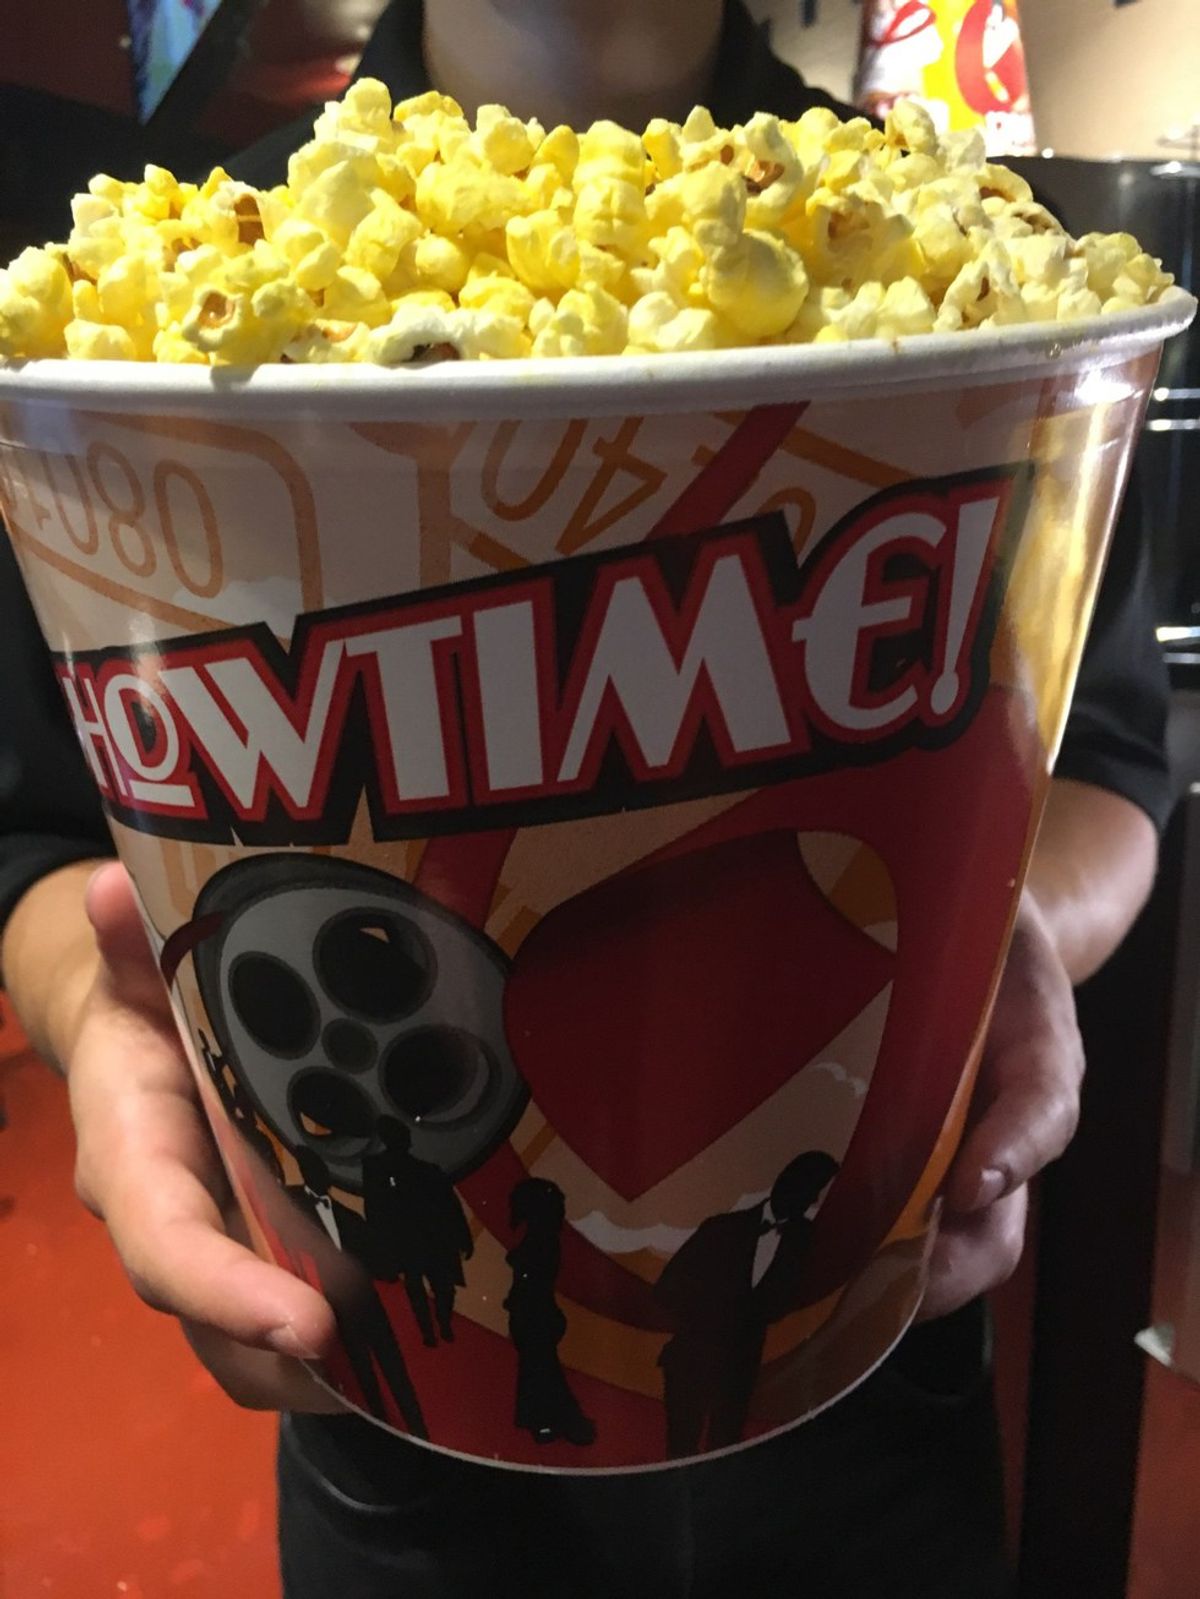 10 Things Everyone Does To Annoy Movie Theater Employees